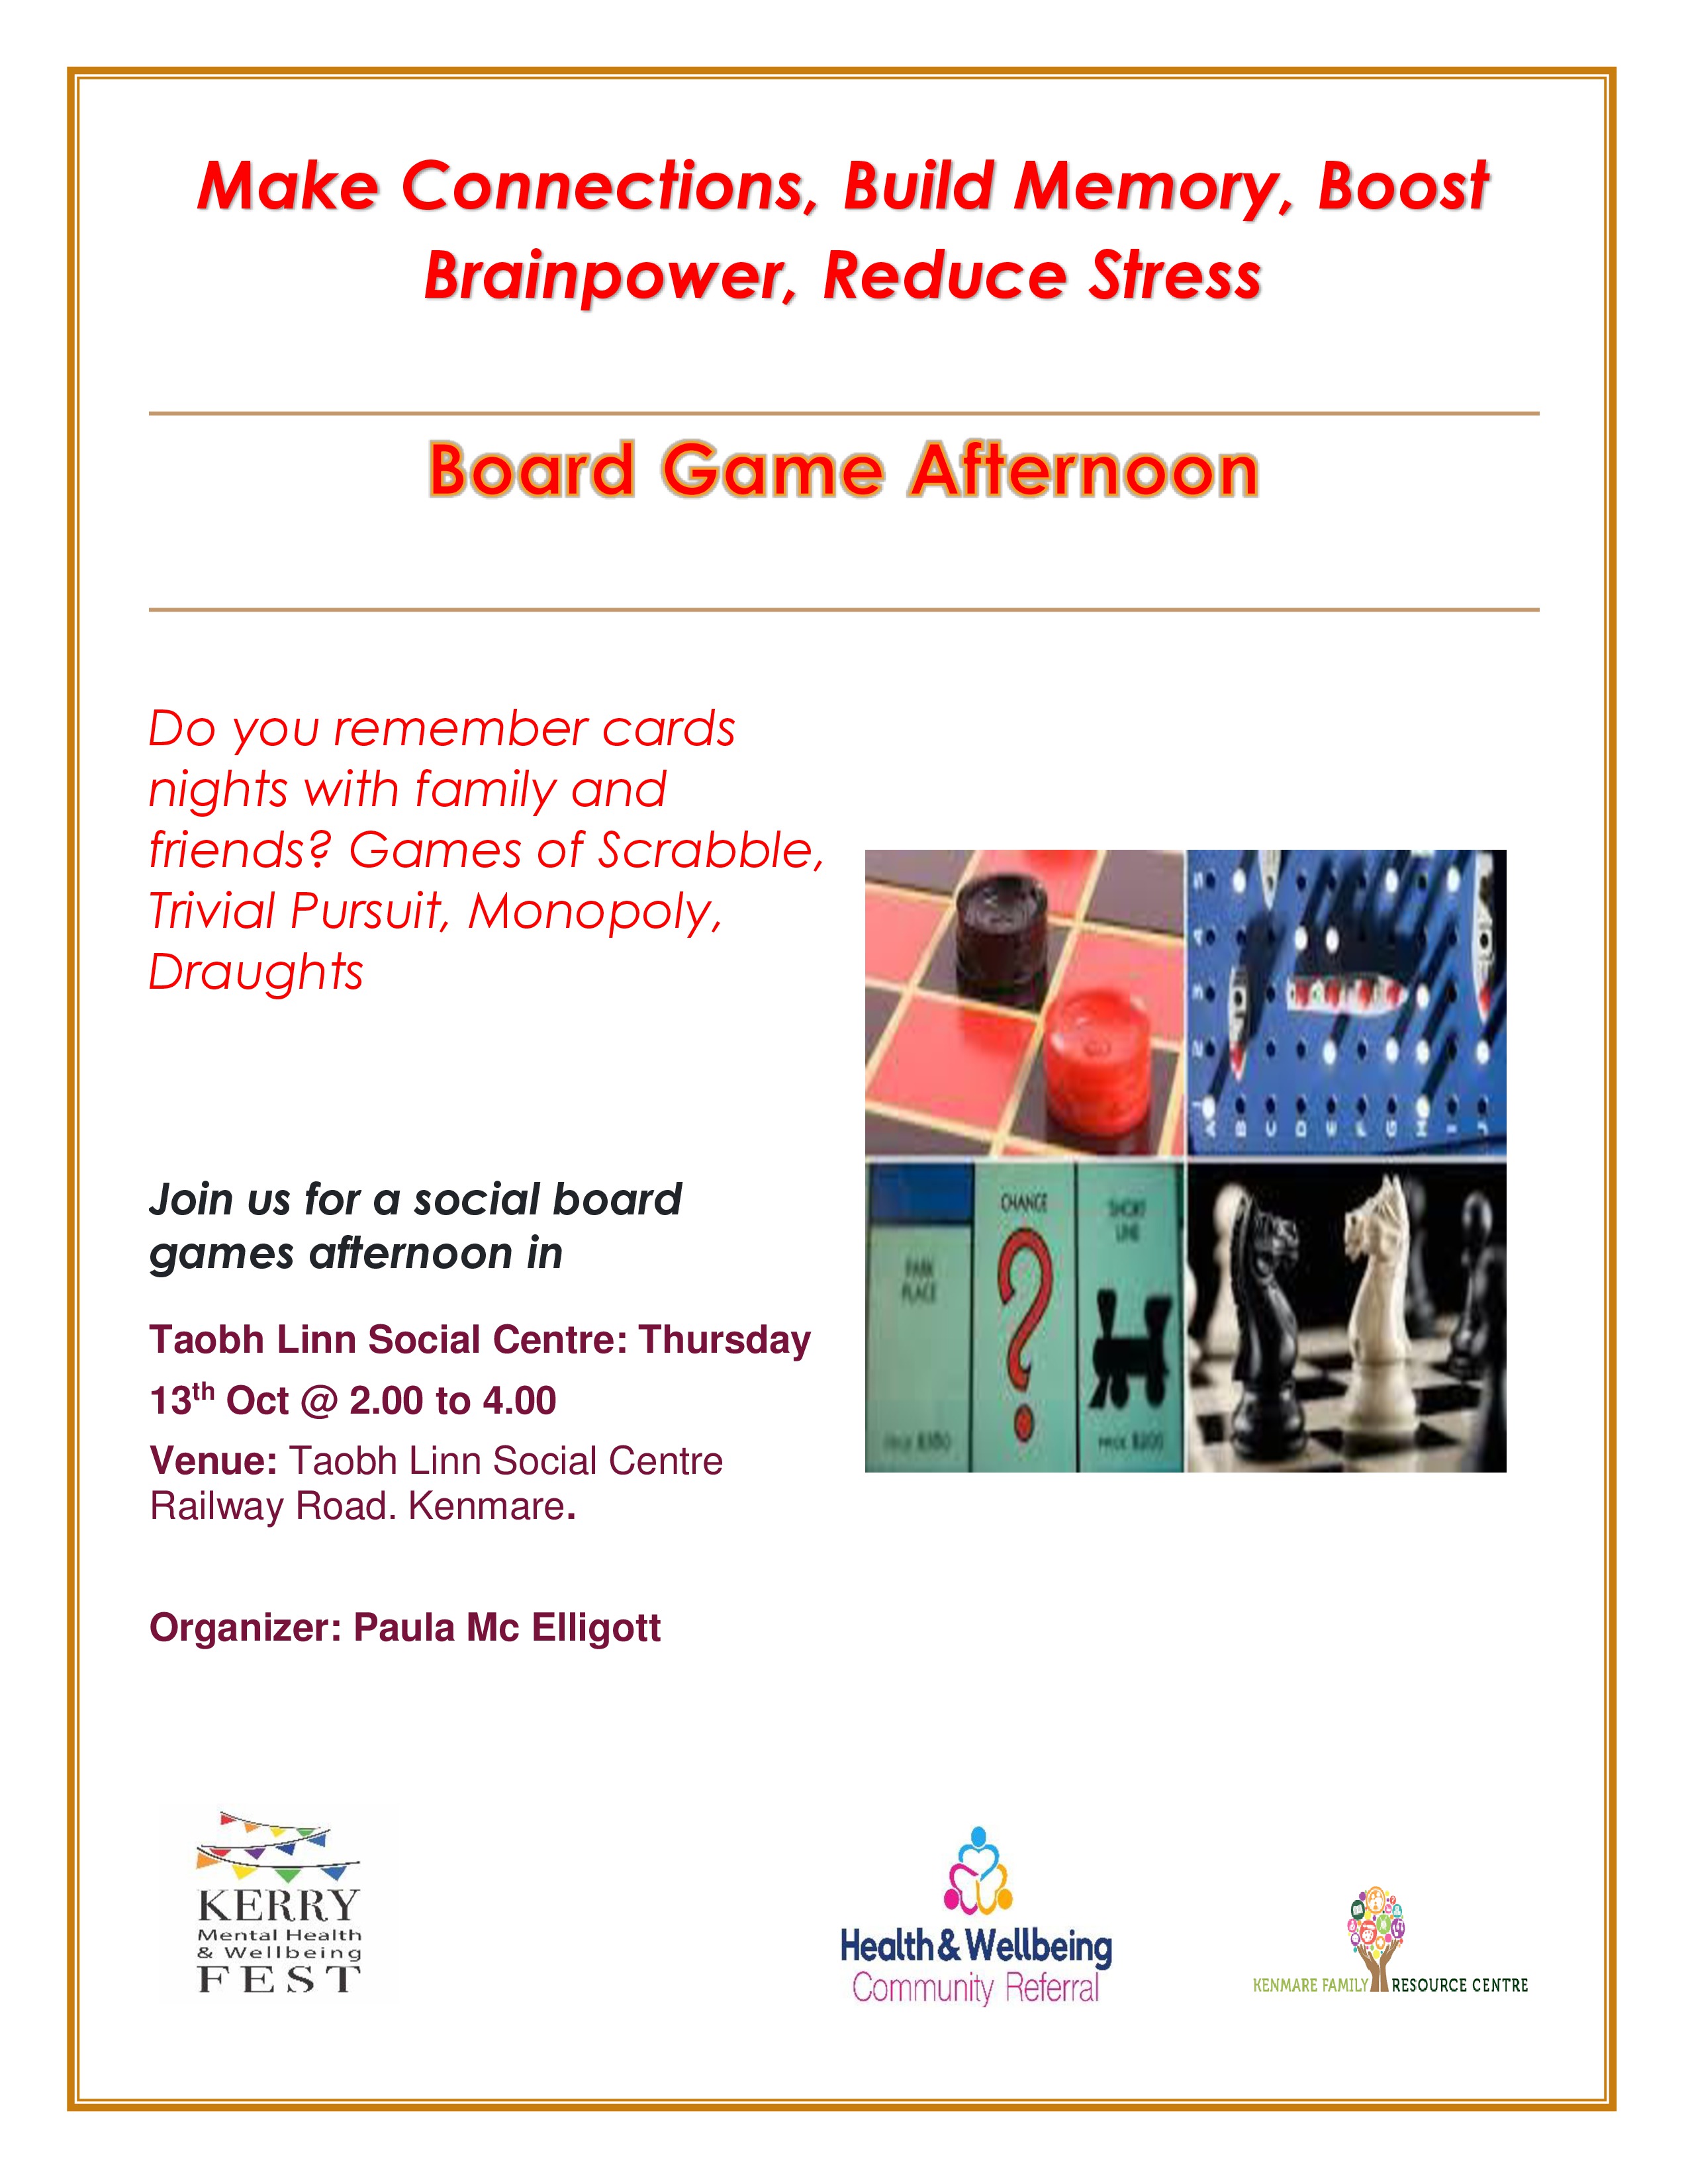 Board Game Afternoon event at Kerry Mental Health & Wellbeing Fest 2023